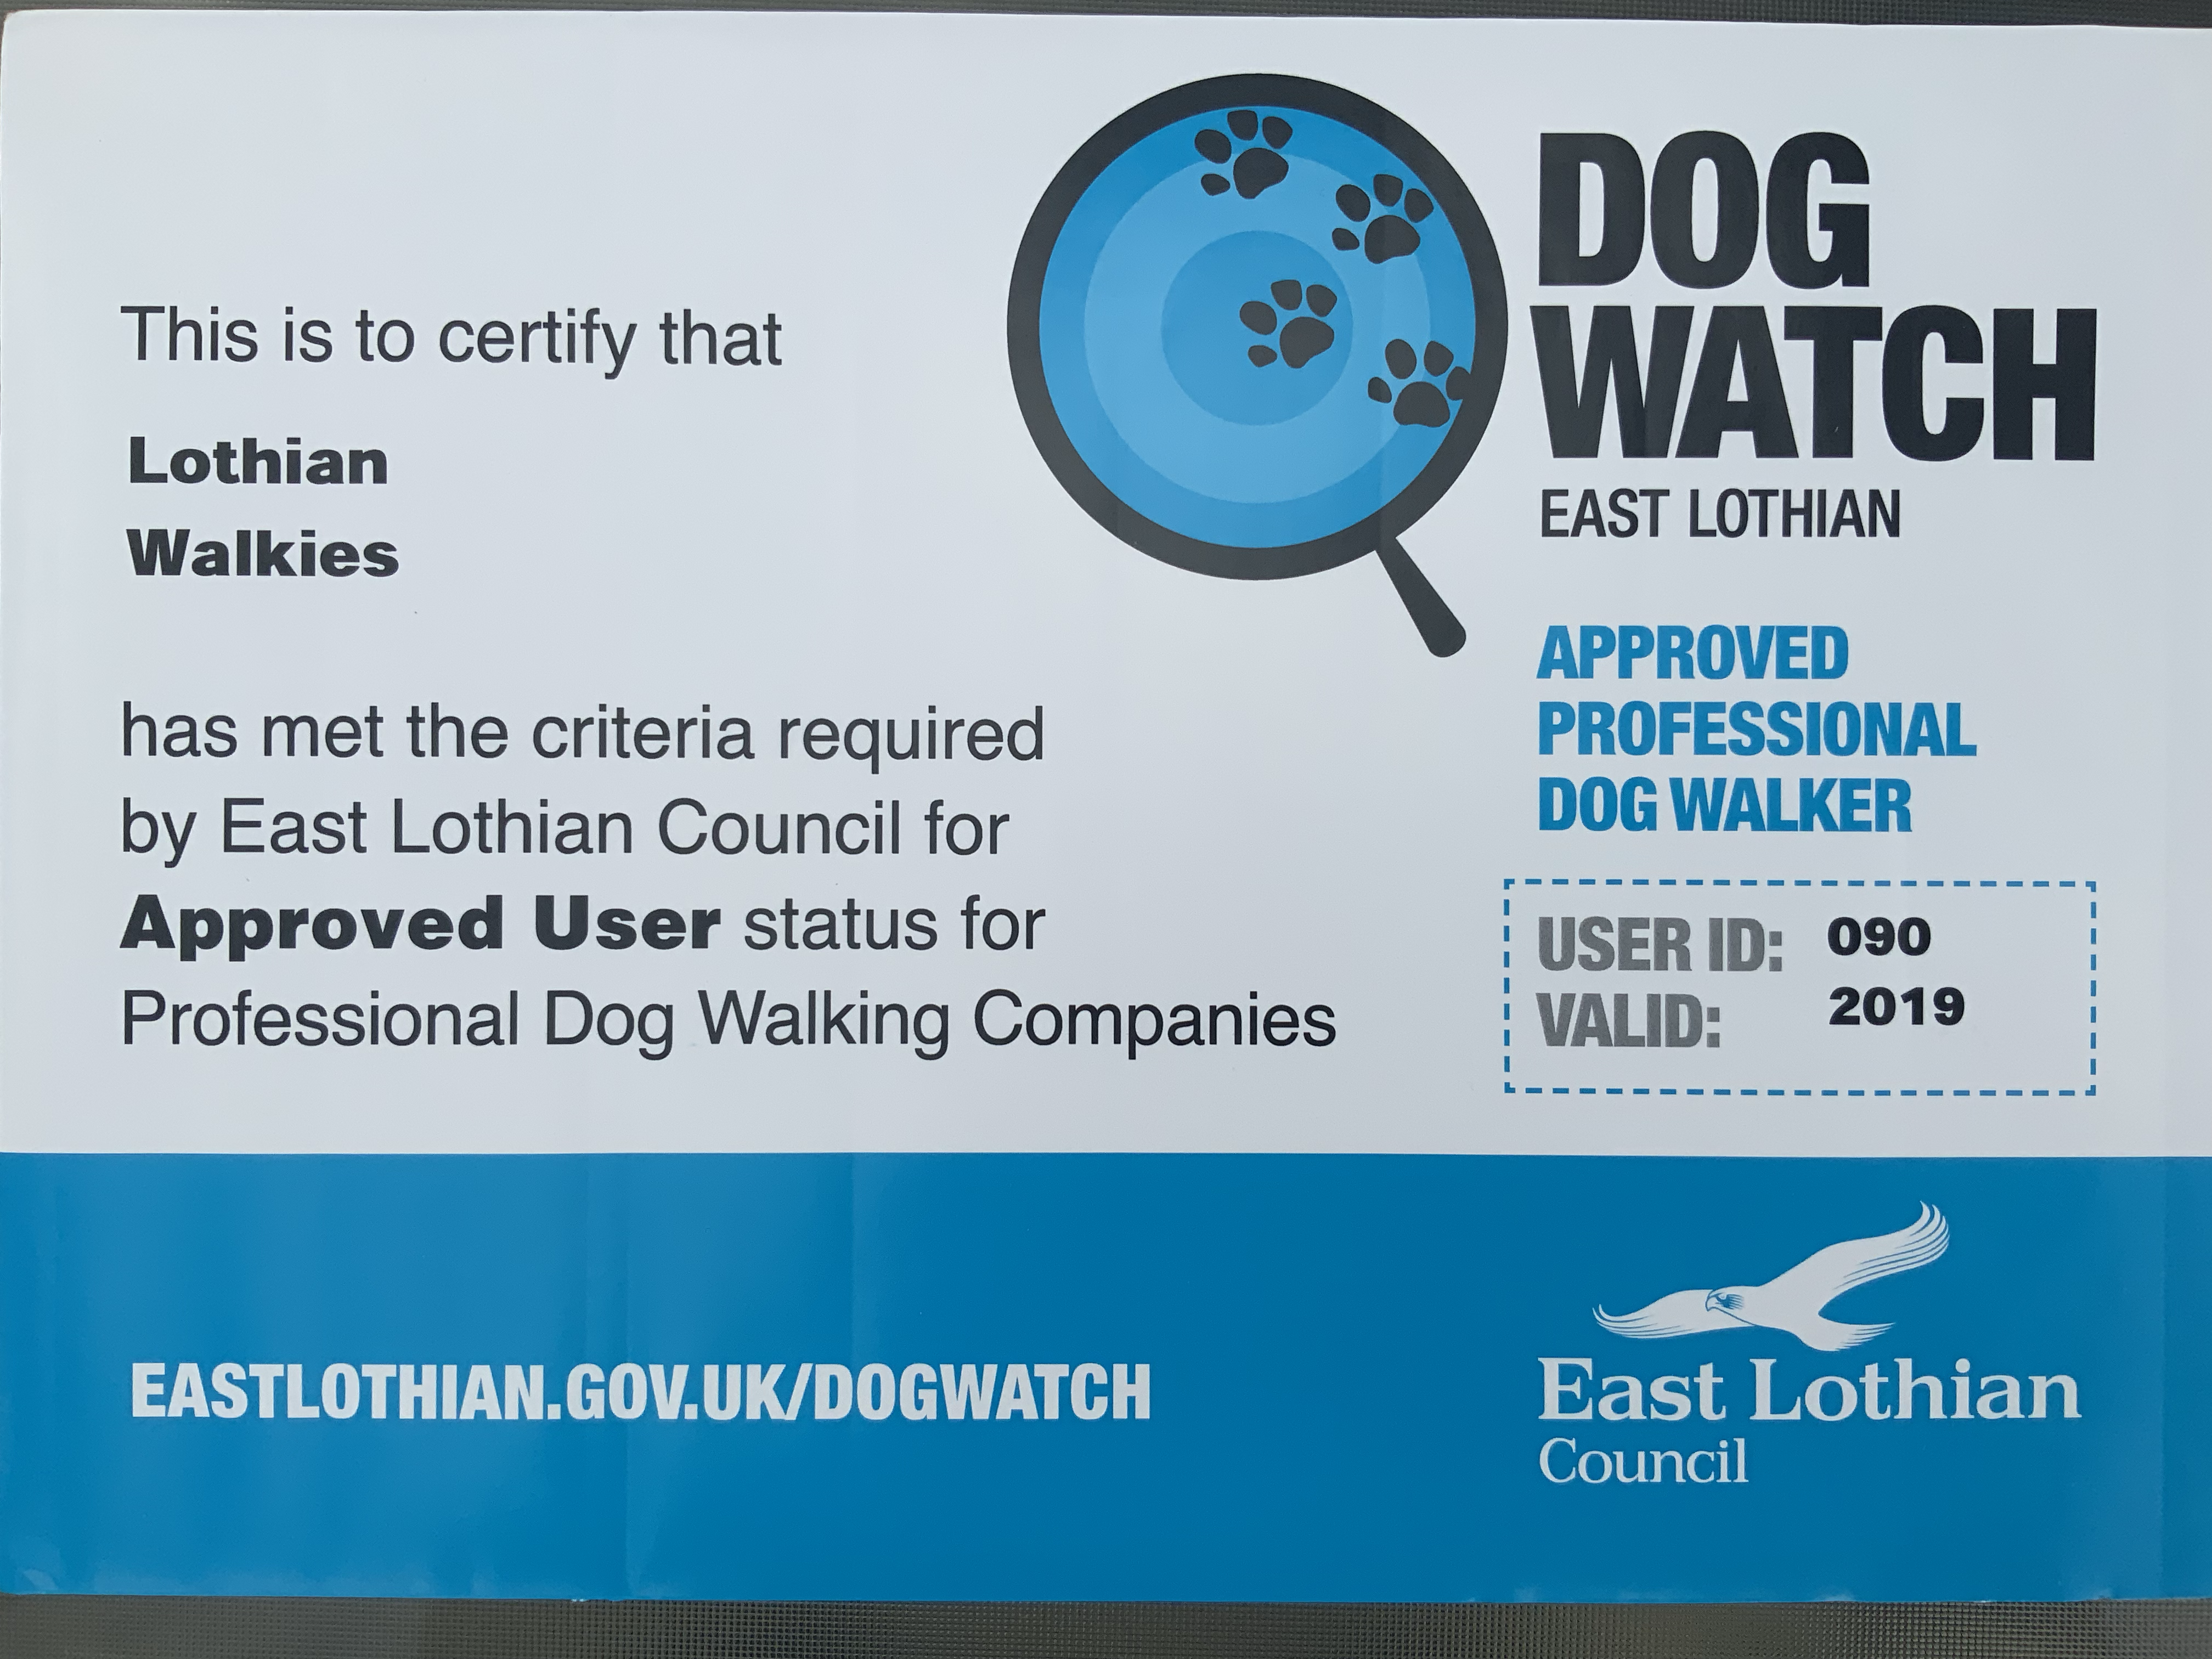 East Lothian approved